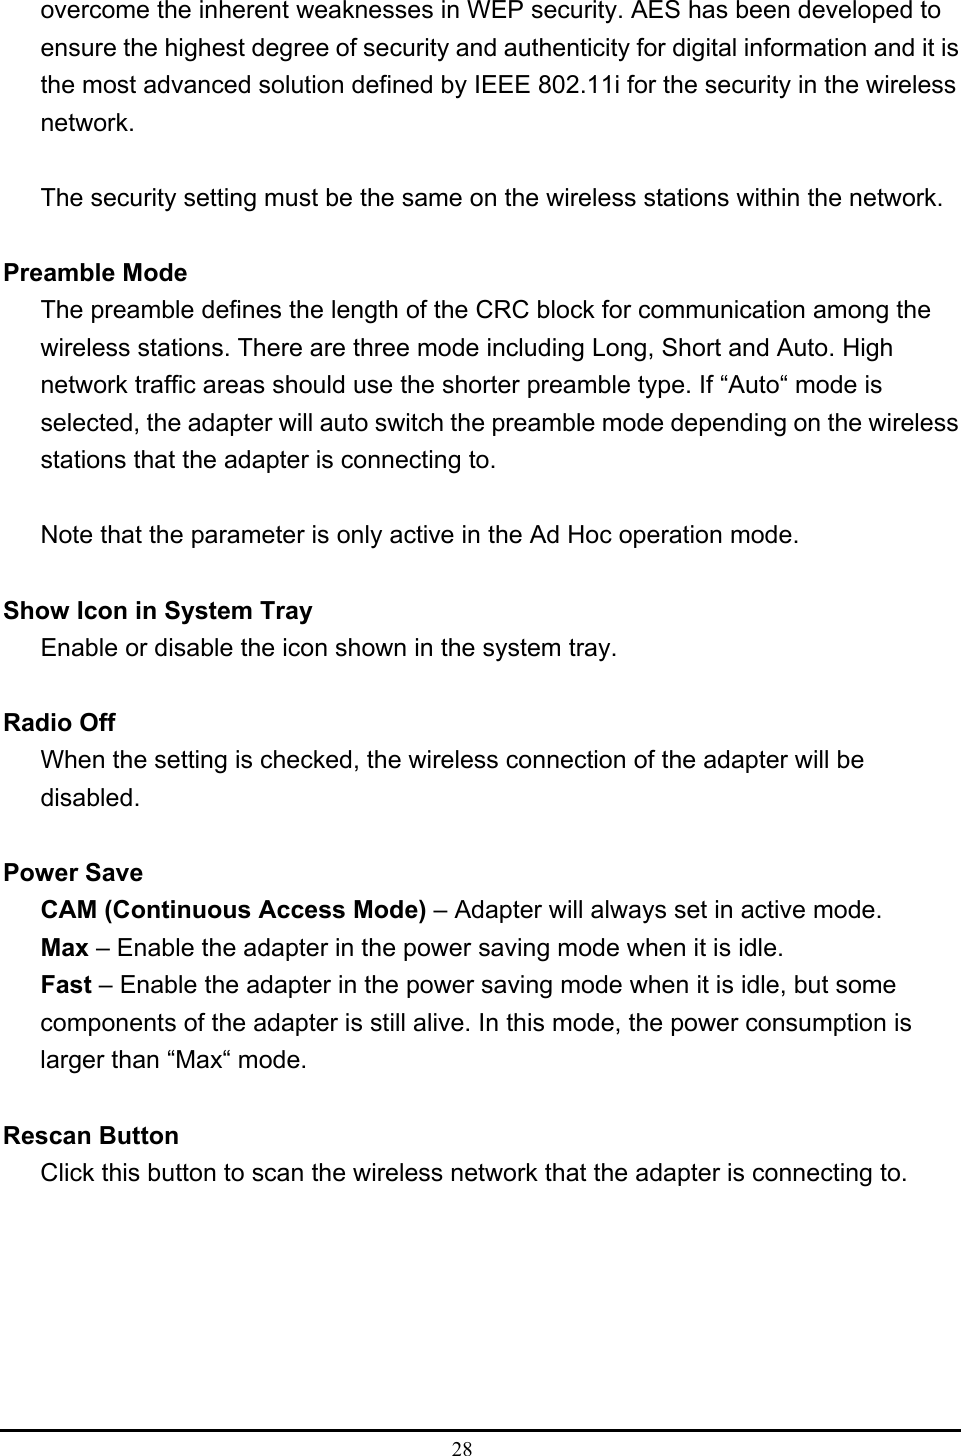  28  overcome the inherent weaknesses in WEP security. AES has been developed to ensure the highest degree of security and authenticity for digital information and it is the most advanced solution defined by IEEE 802.11i for the security in the wireless network.  The security setting must be the same on the wireless stations within the network.  Preamble Mode The preamble defines the length of the CRC block for communication among the wireless stations. There are three mode including Long, Short and Auto. High network traffic areas should use the shorter preamble type. If “Auto“ mode is selected, the adapter will auto switch the preamble mode depending on the wireless stations that the adapter is connecting to.  Note that the parameter is only active in the Ad Hoc operation mode.  Show Icon in System Tray Enable or disable the icon shown in the system tray.  Radio Off   When the setting is checked, the wireless connection of the adapter will be disabled.  Power Save CAM (Continuous Access Mode) – Adapter will always set in active mode. Max – Enable the adapter in the power saving mode when it is idle. Fast – Enable the adapter in the power saving mode when it is idle, but some components of the adapter is still alive. In this mode, the power consumption is larger than “Max“ mode.  Rescan Button Click this button to scan the wireless network that the adapter is connecting to. 